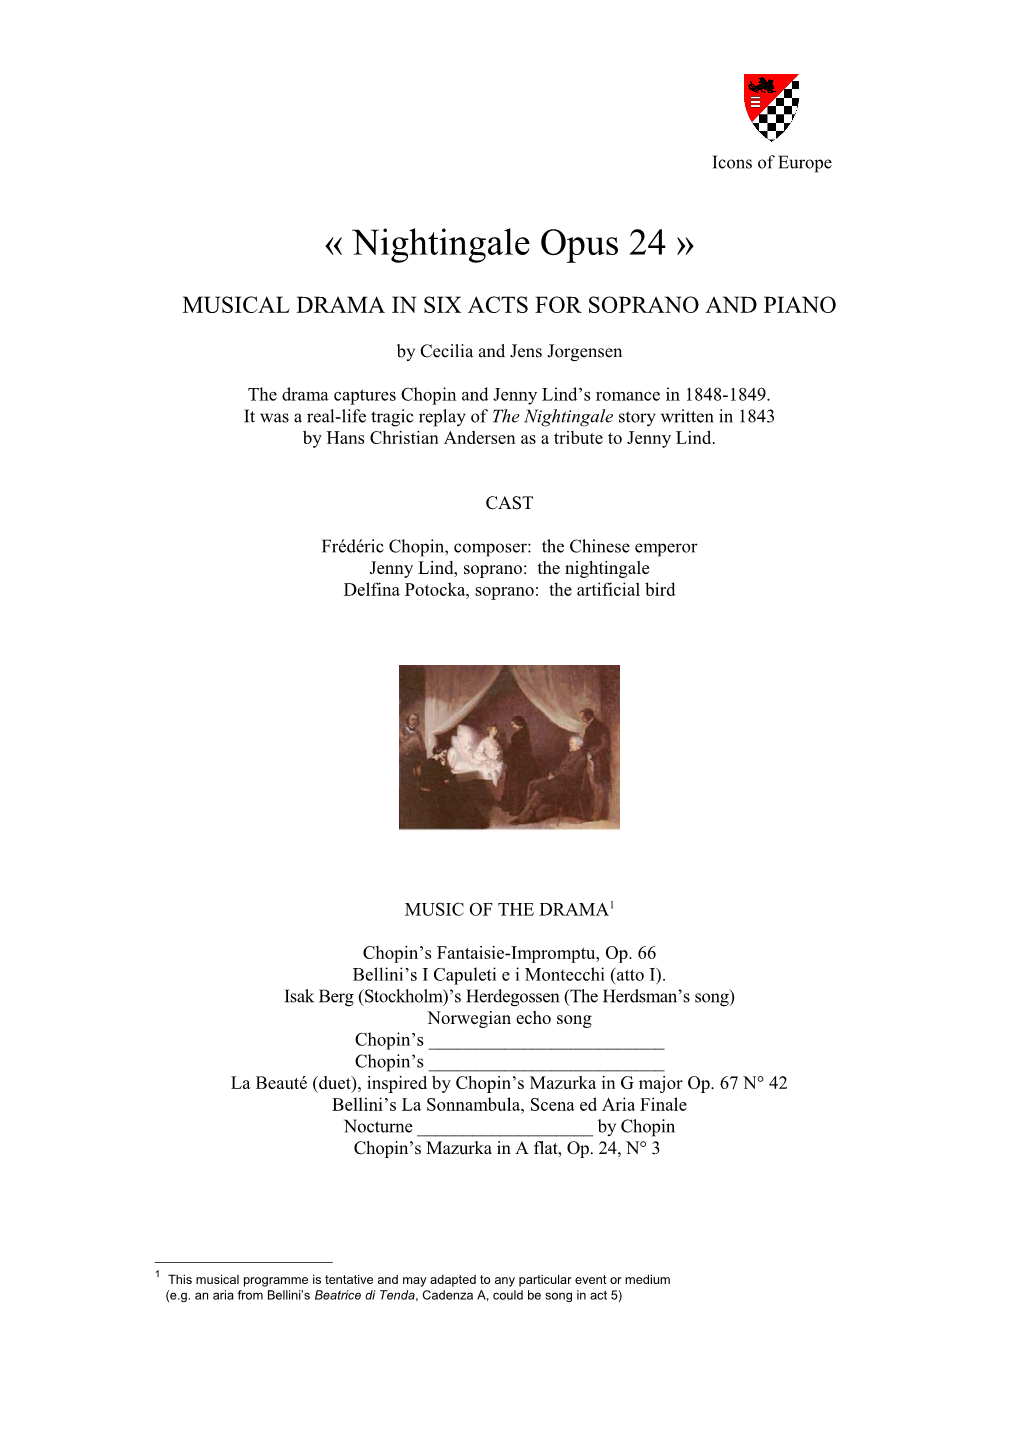 Musical Drama in Six Acts for Soprano and Piano